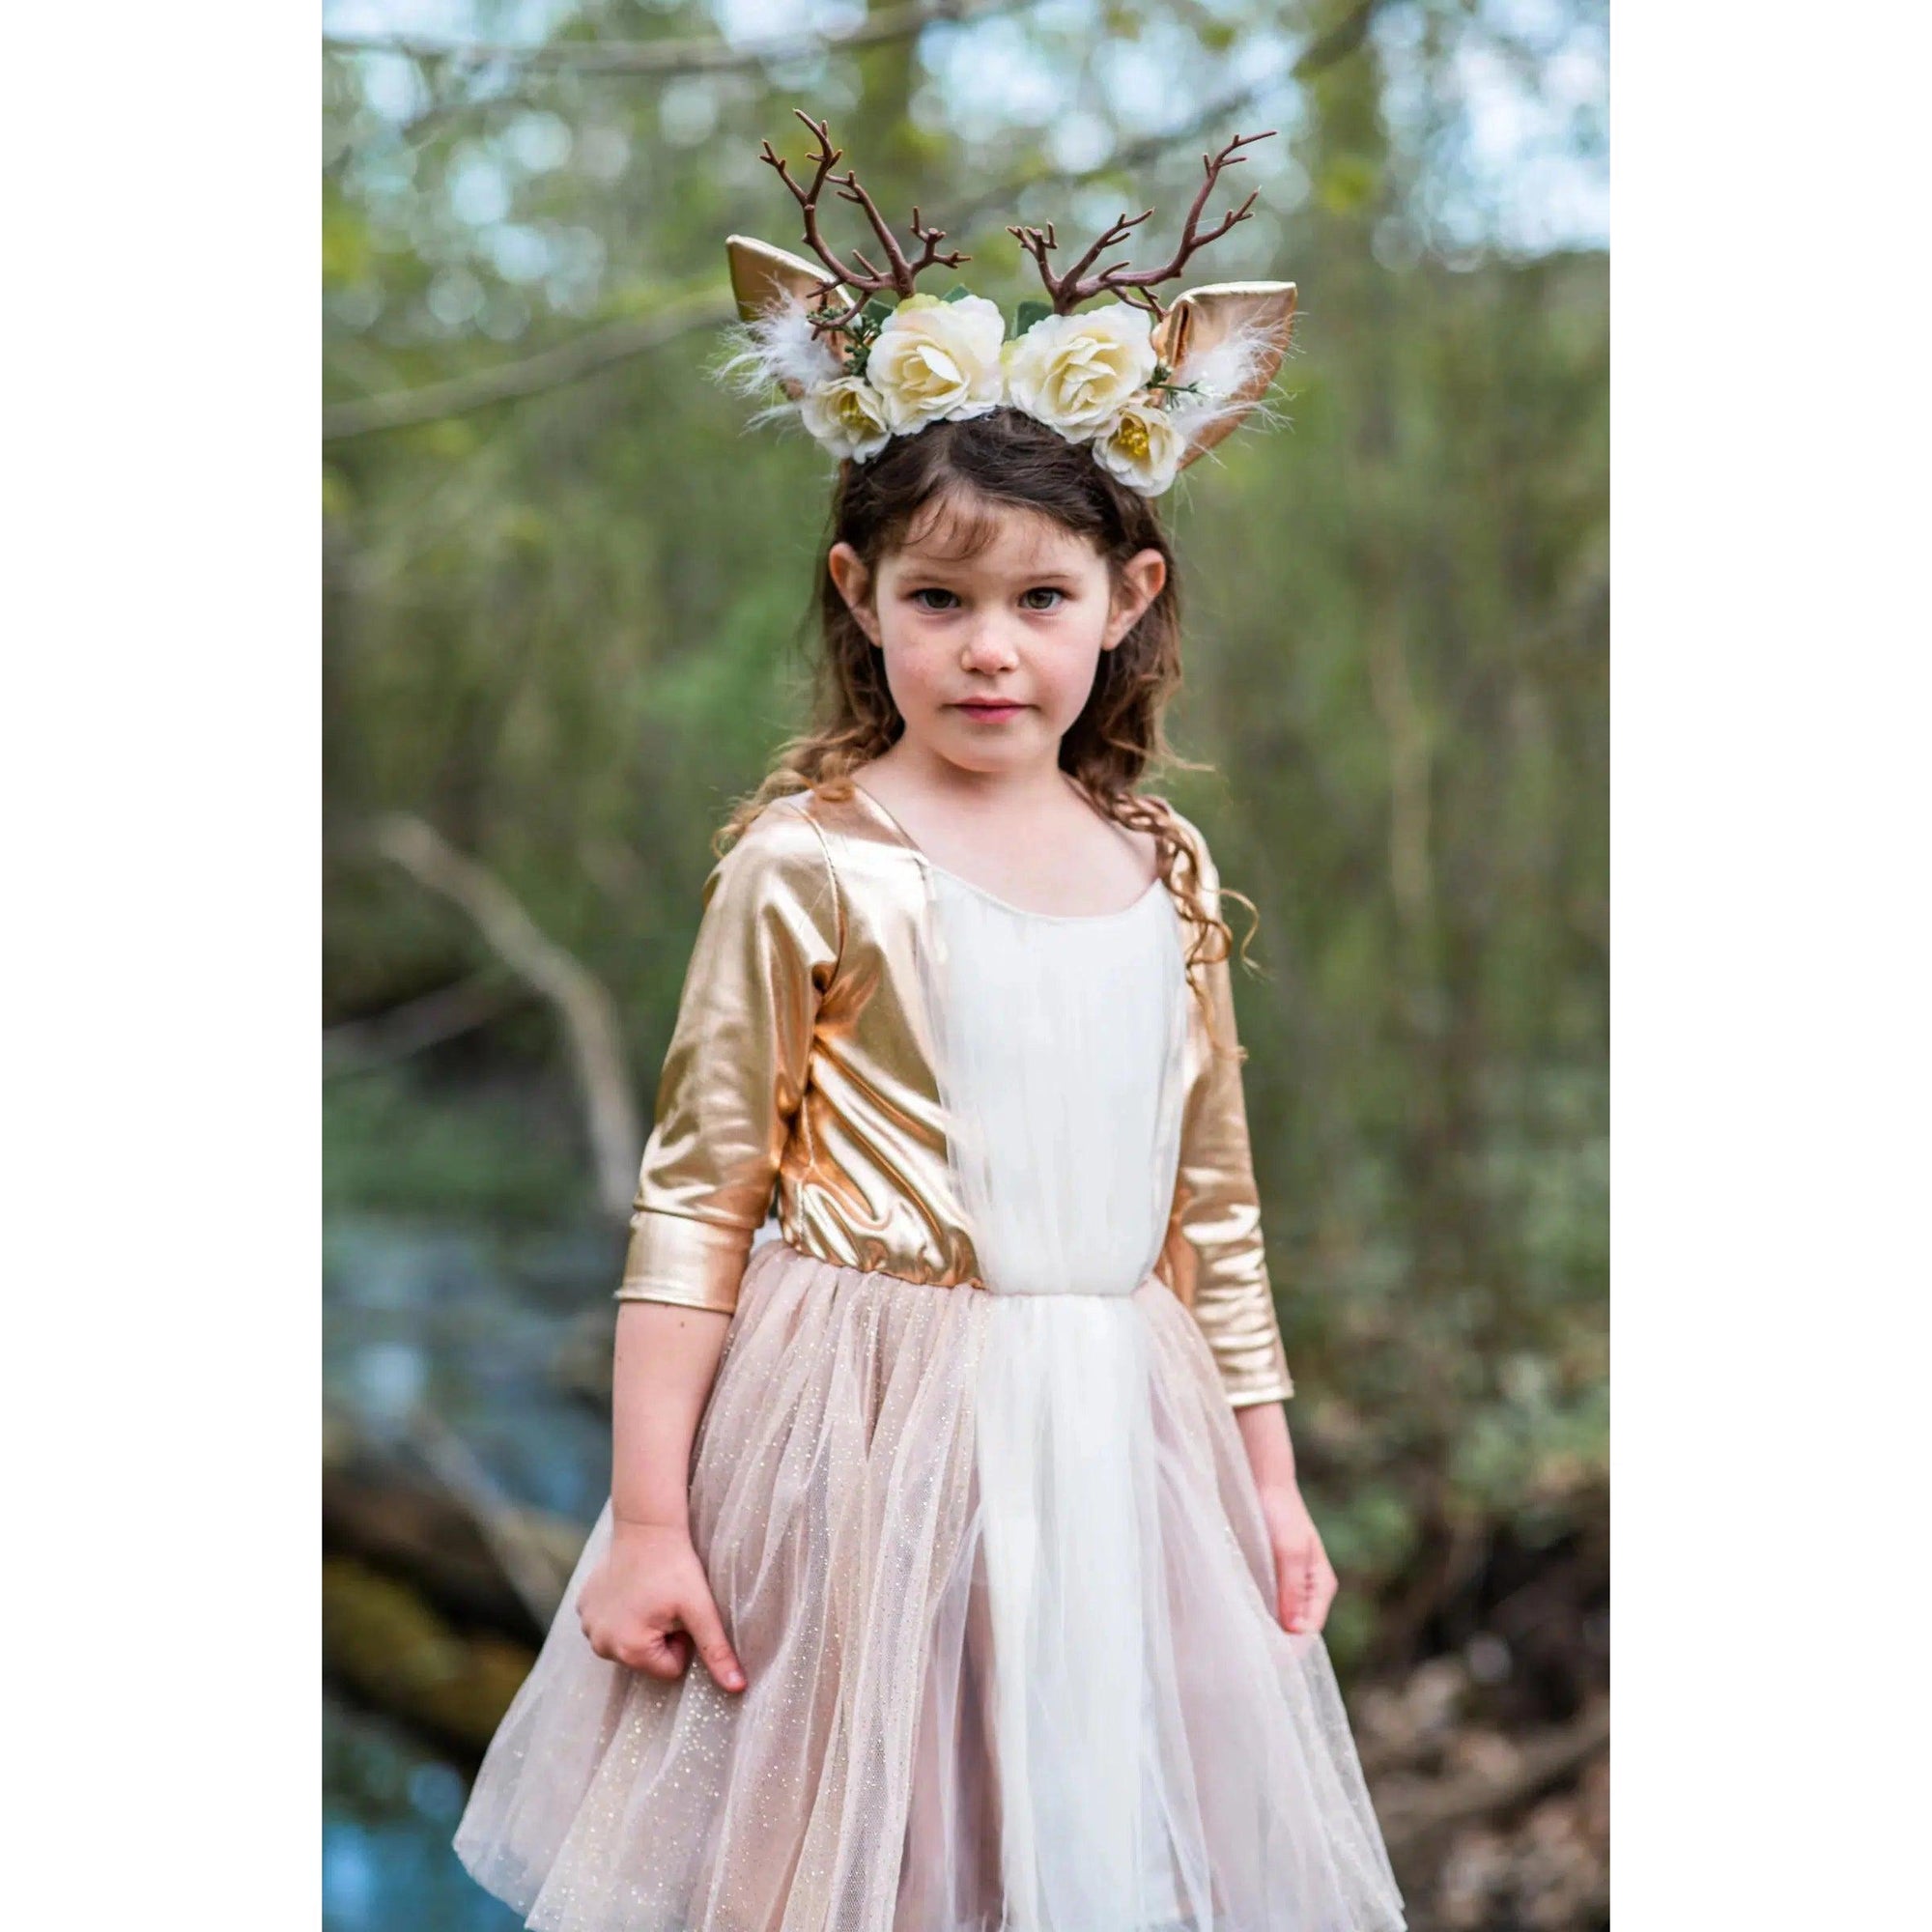 Girl on a bridge with skirt fanned out, wearing deer costume.